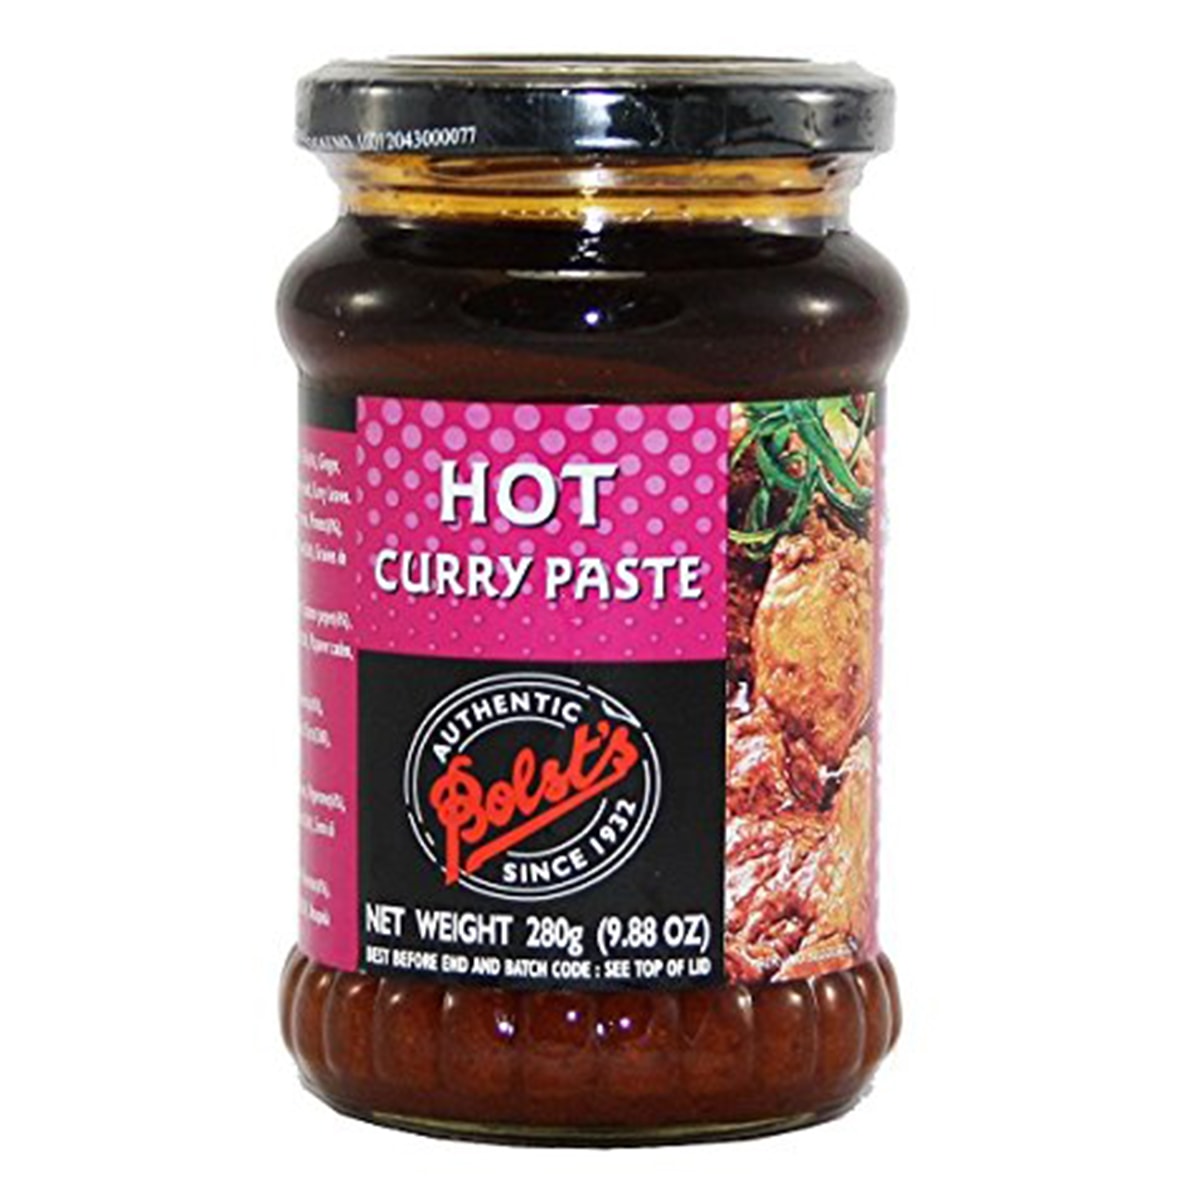 Buy Bolsts Hot Curry Paste - 280 gm